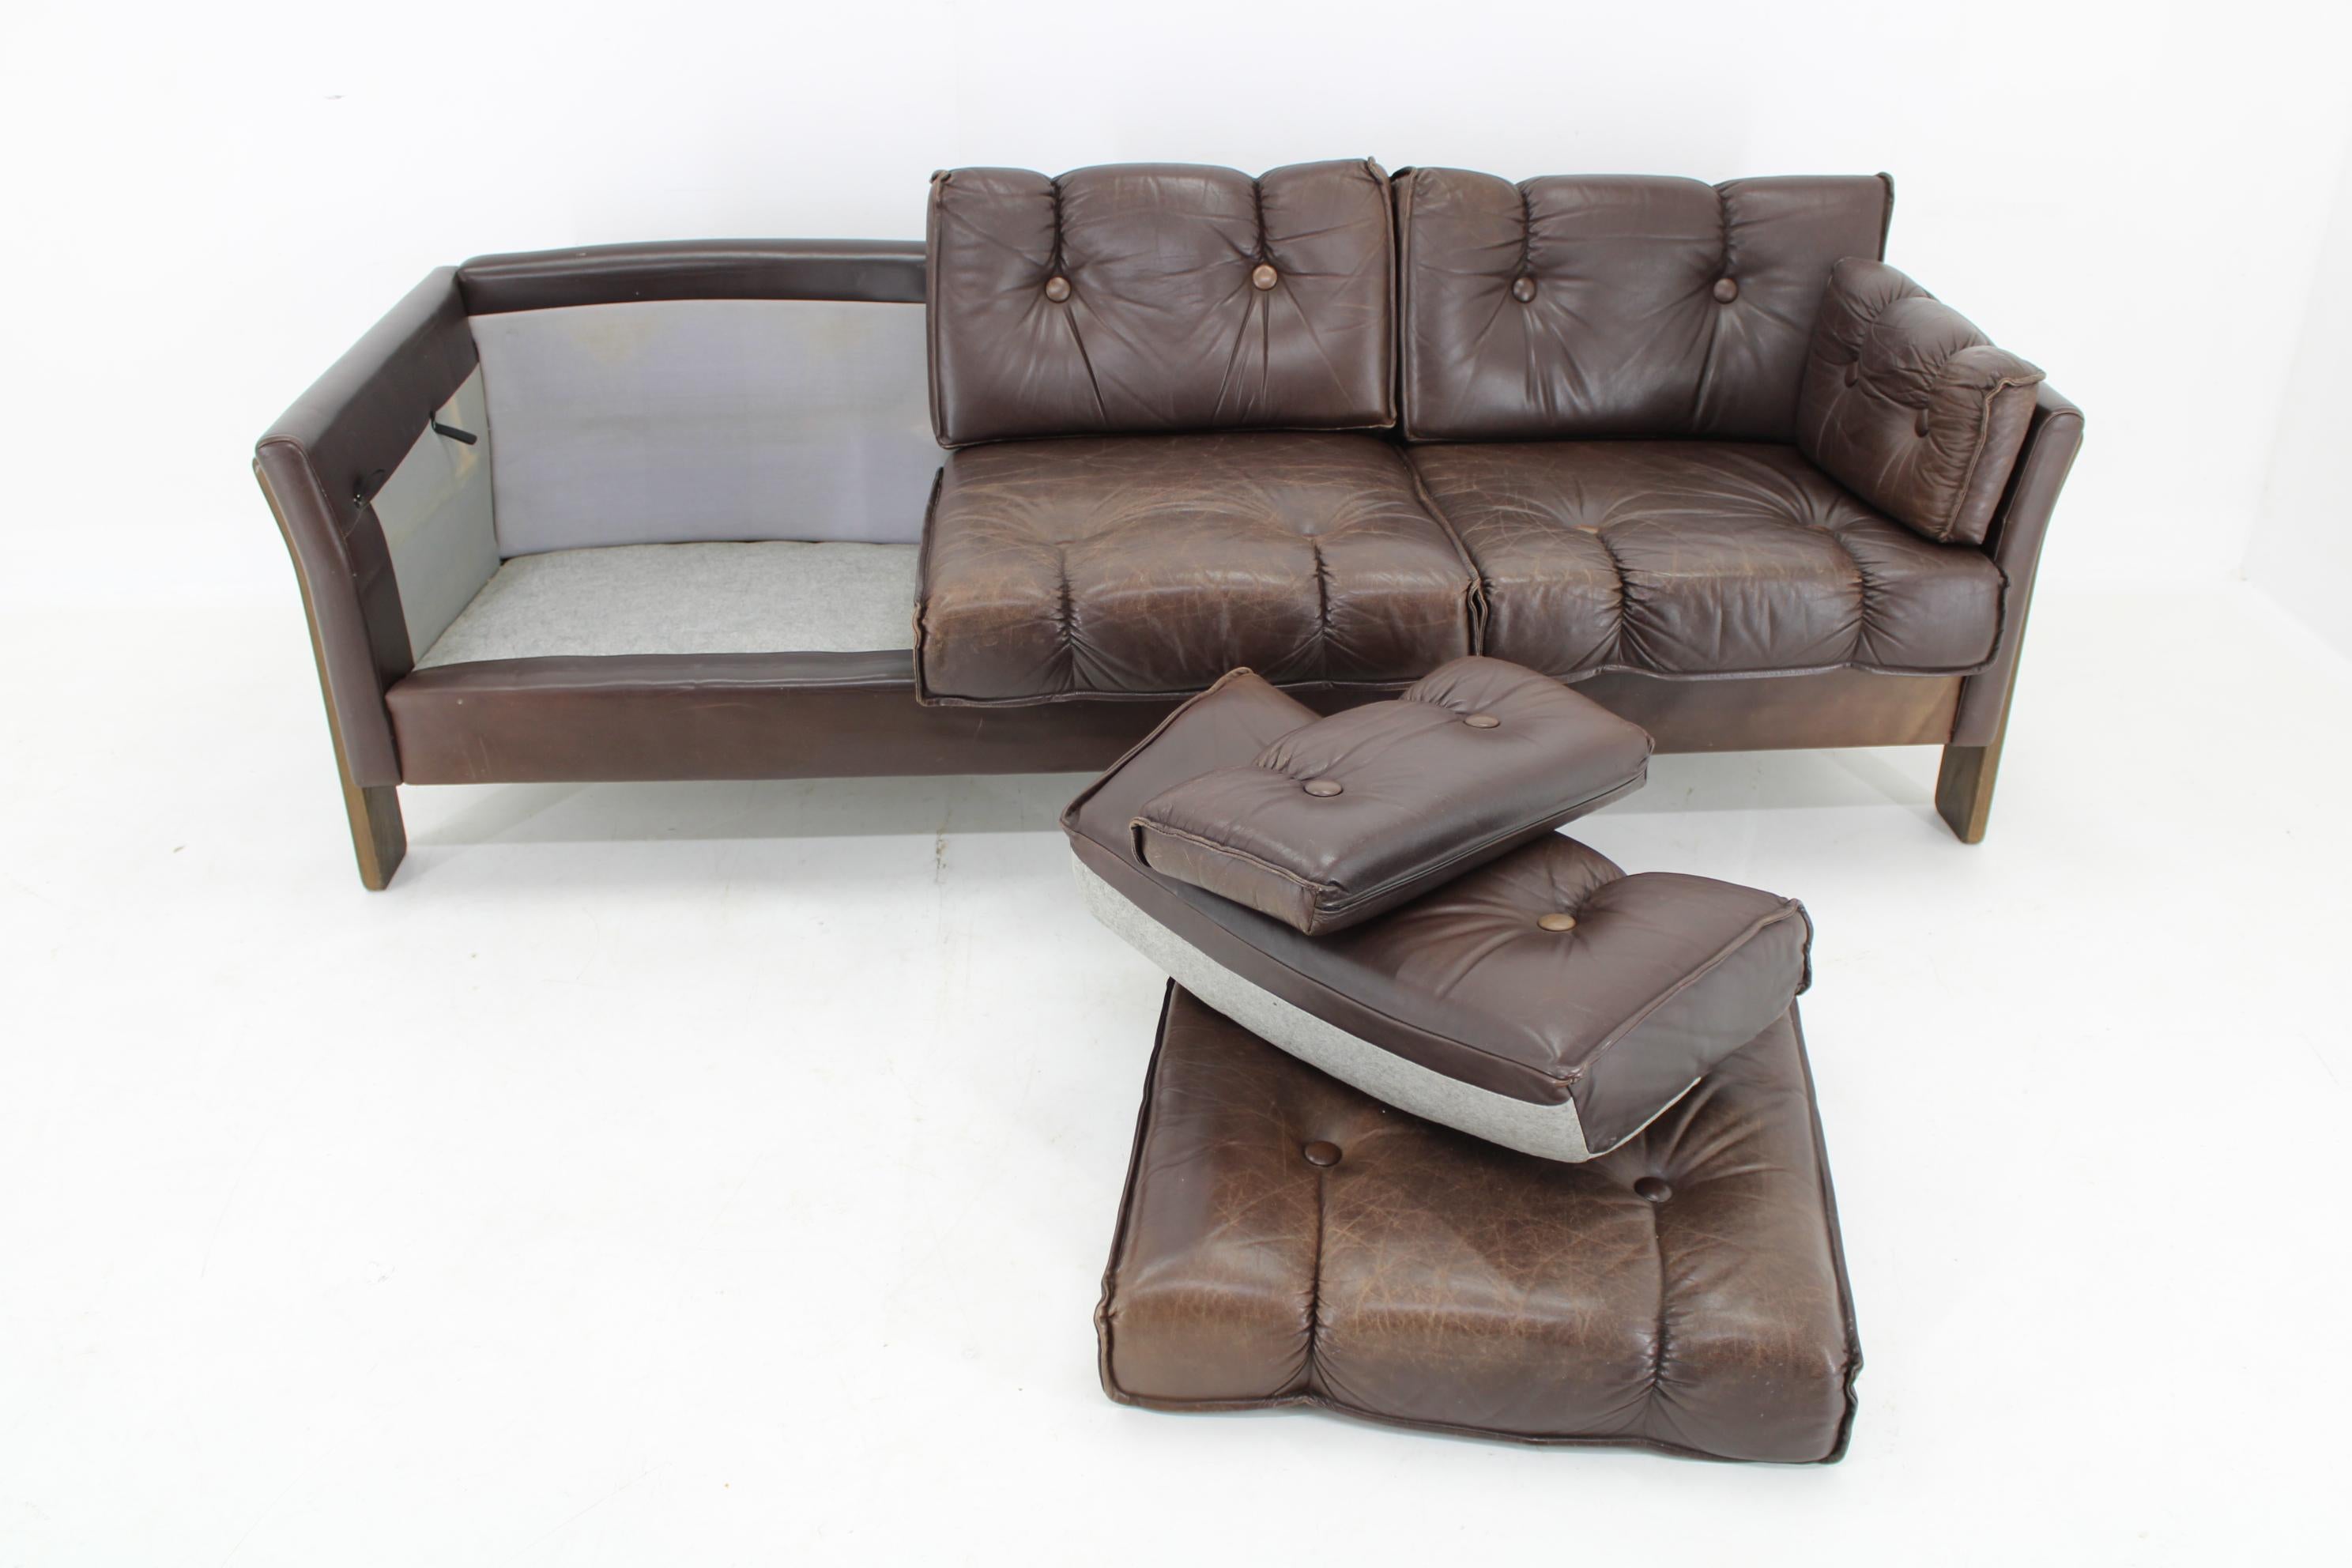 1970s Brown Leather 3-Seater Sofa, Denmark For Sale 4